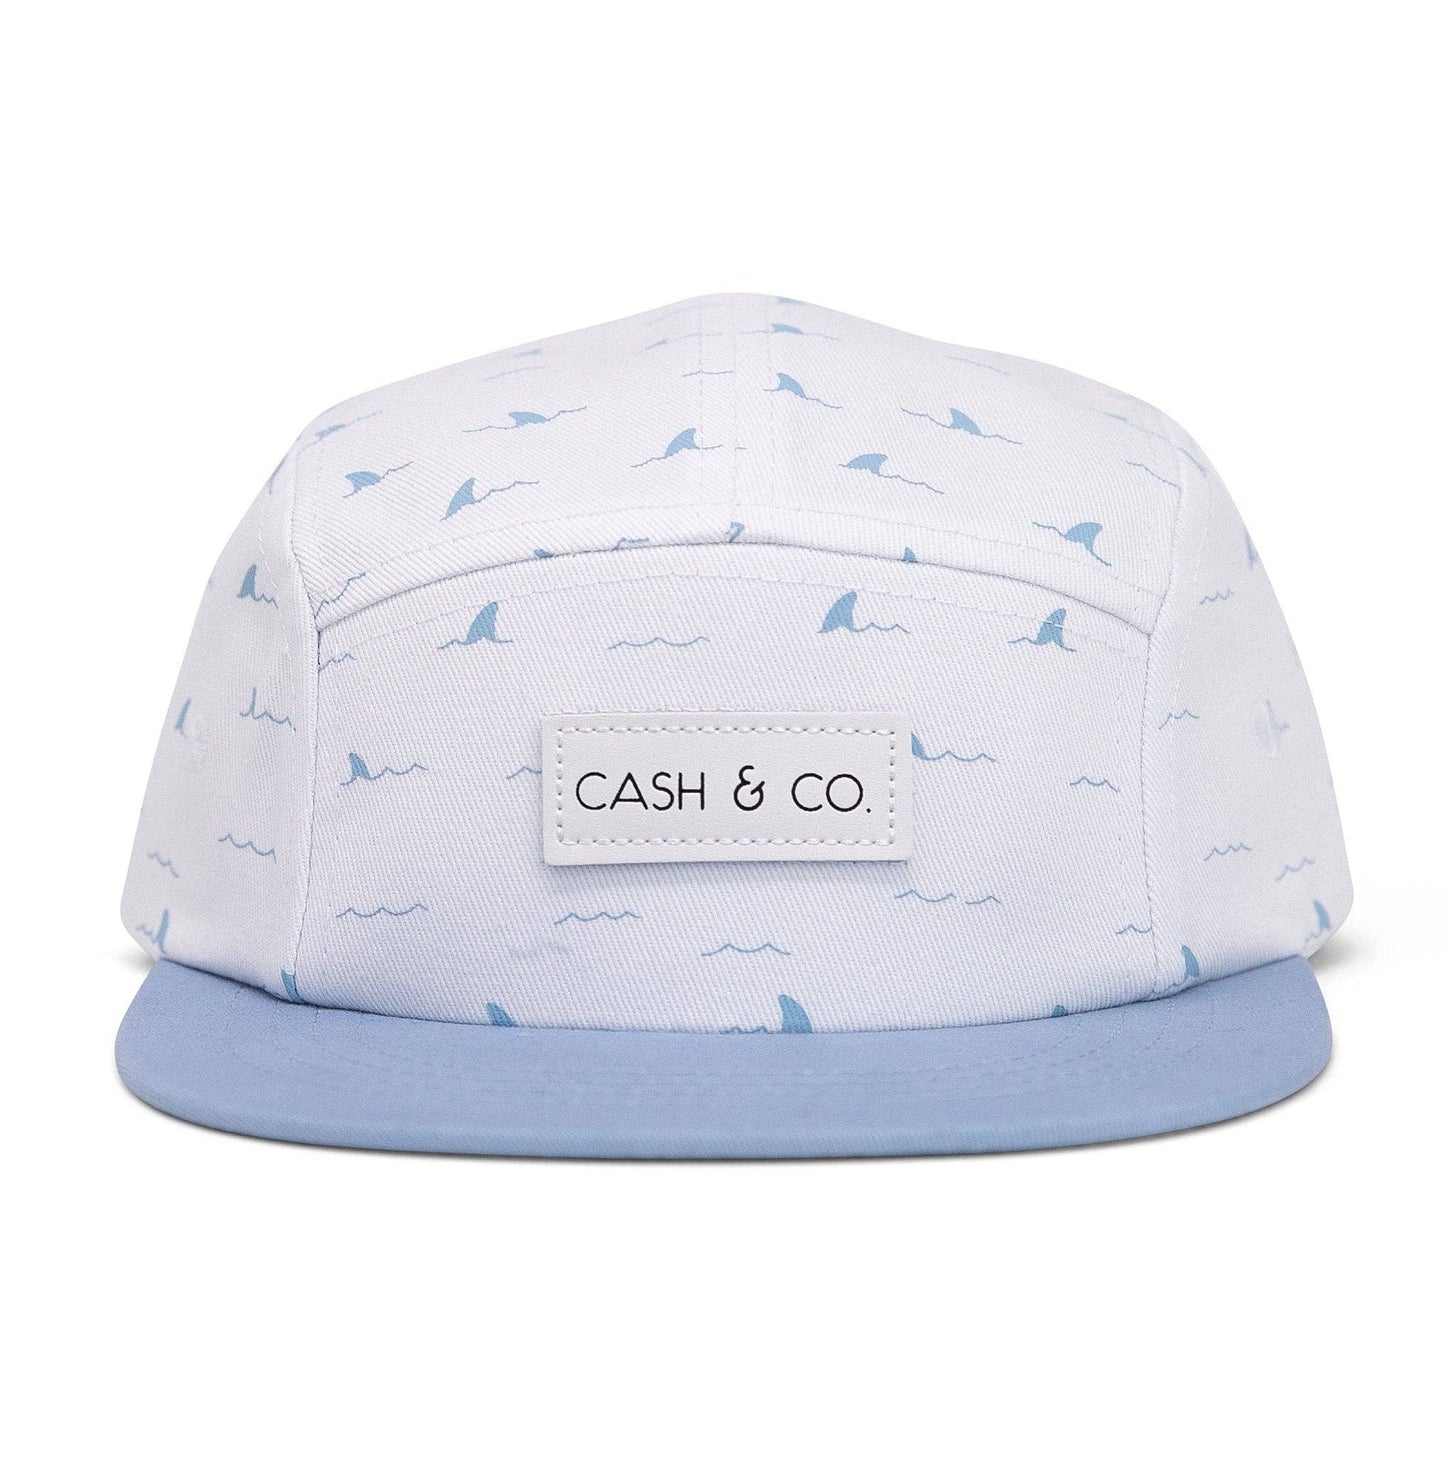 Great White Youth Hat